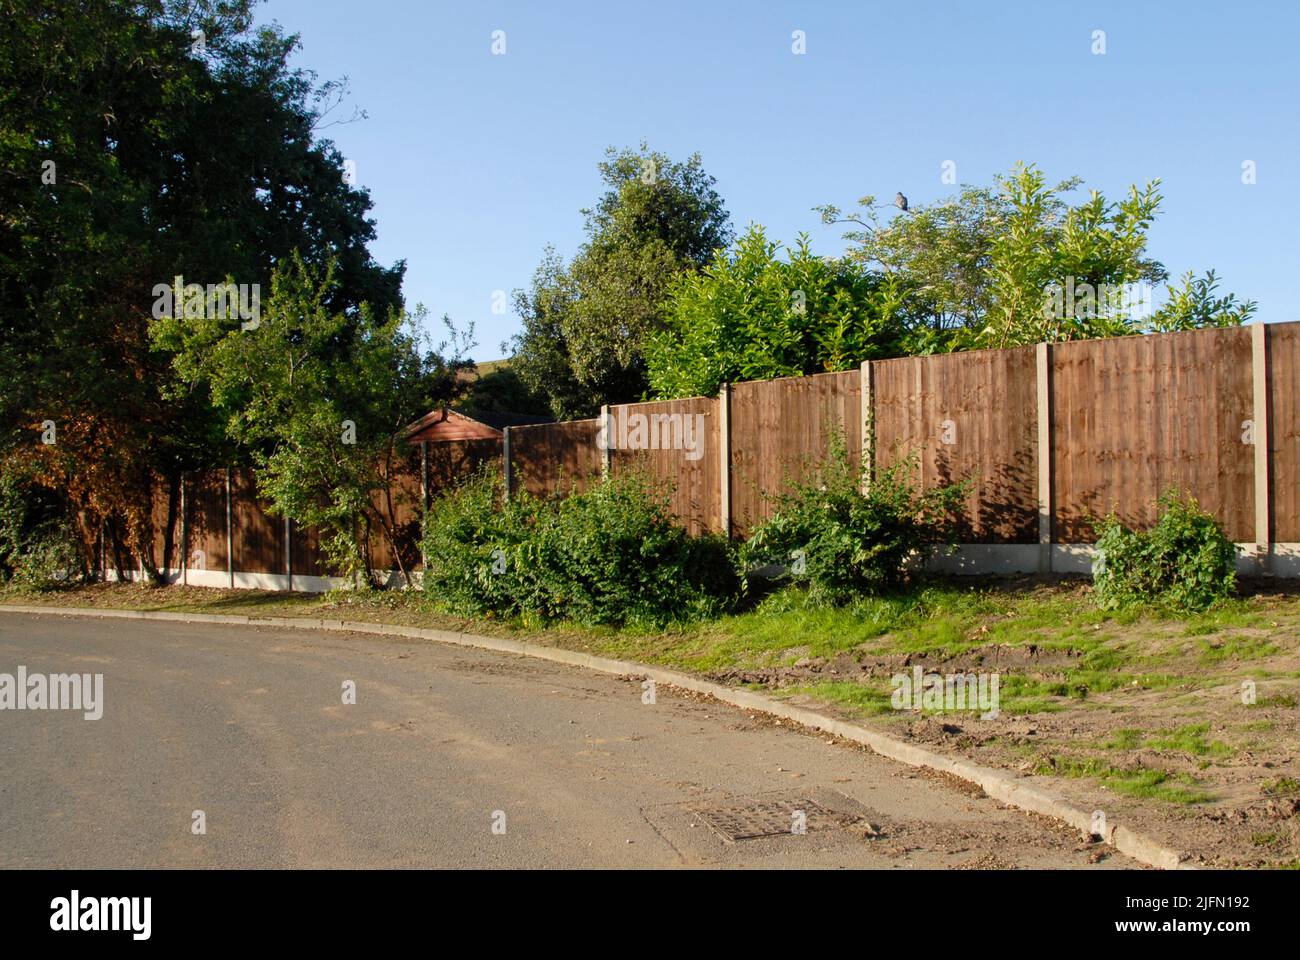 Exterior of new fencing with concrete posts and six-by-six feet dark wooden panels enclosing garden in quiet suburban area Stock Photo